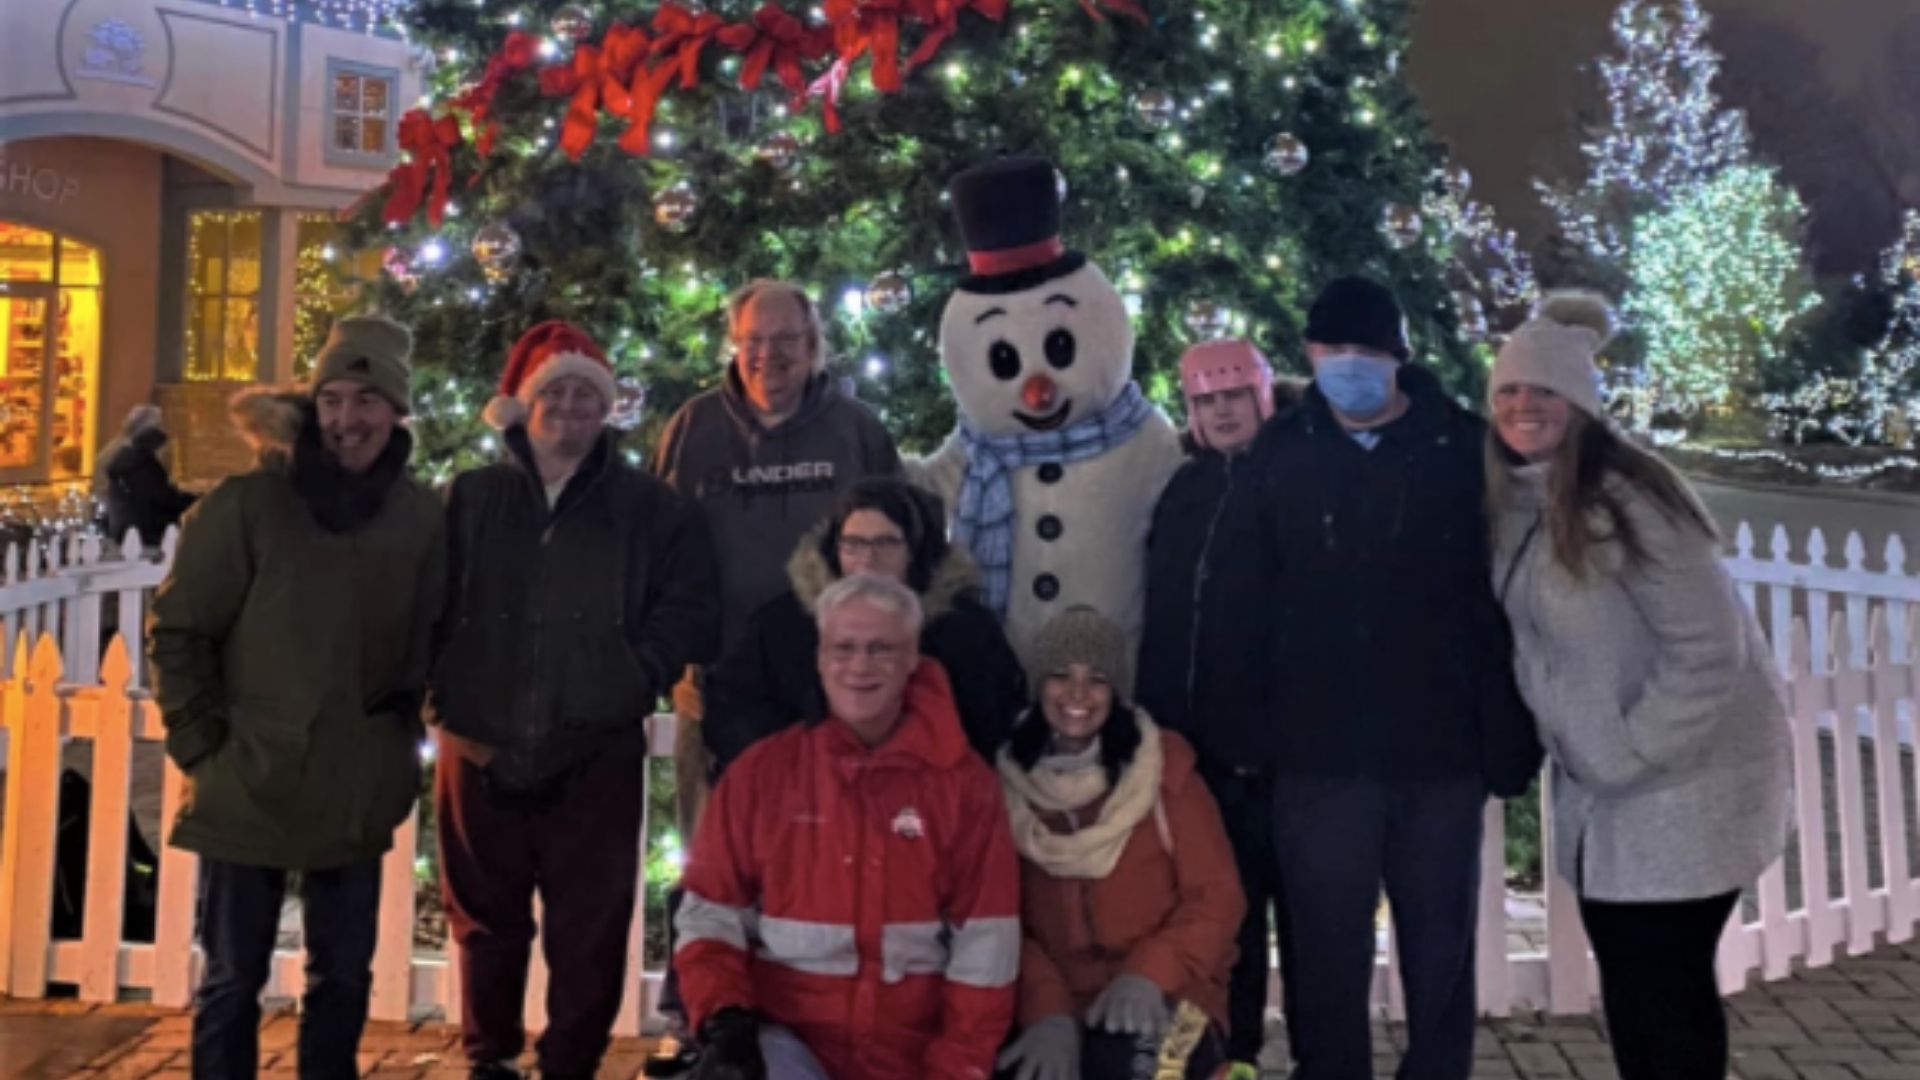 Ken Anderson Alliance December ENGAGE Participants at Festival of Lights